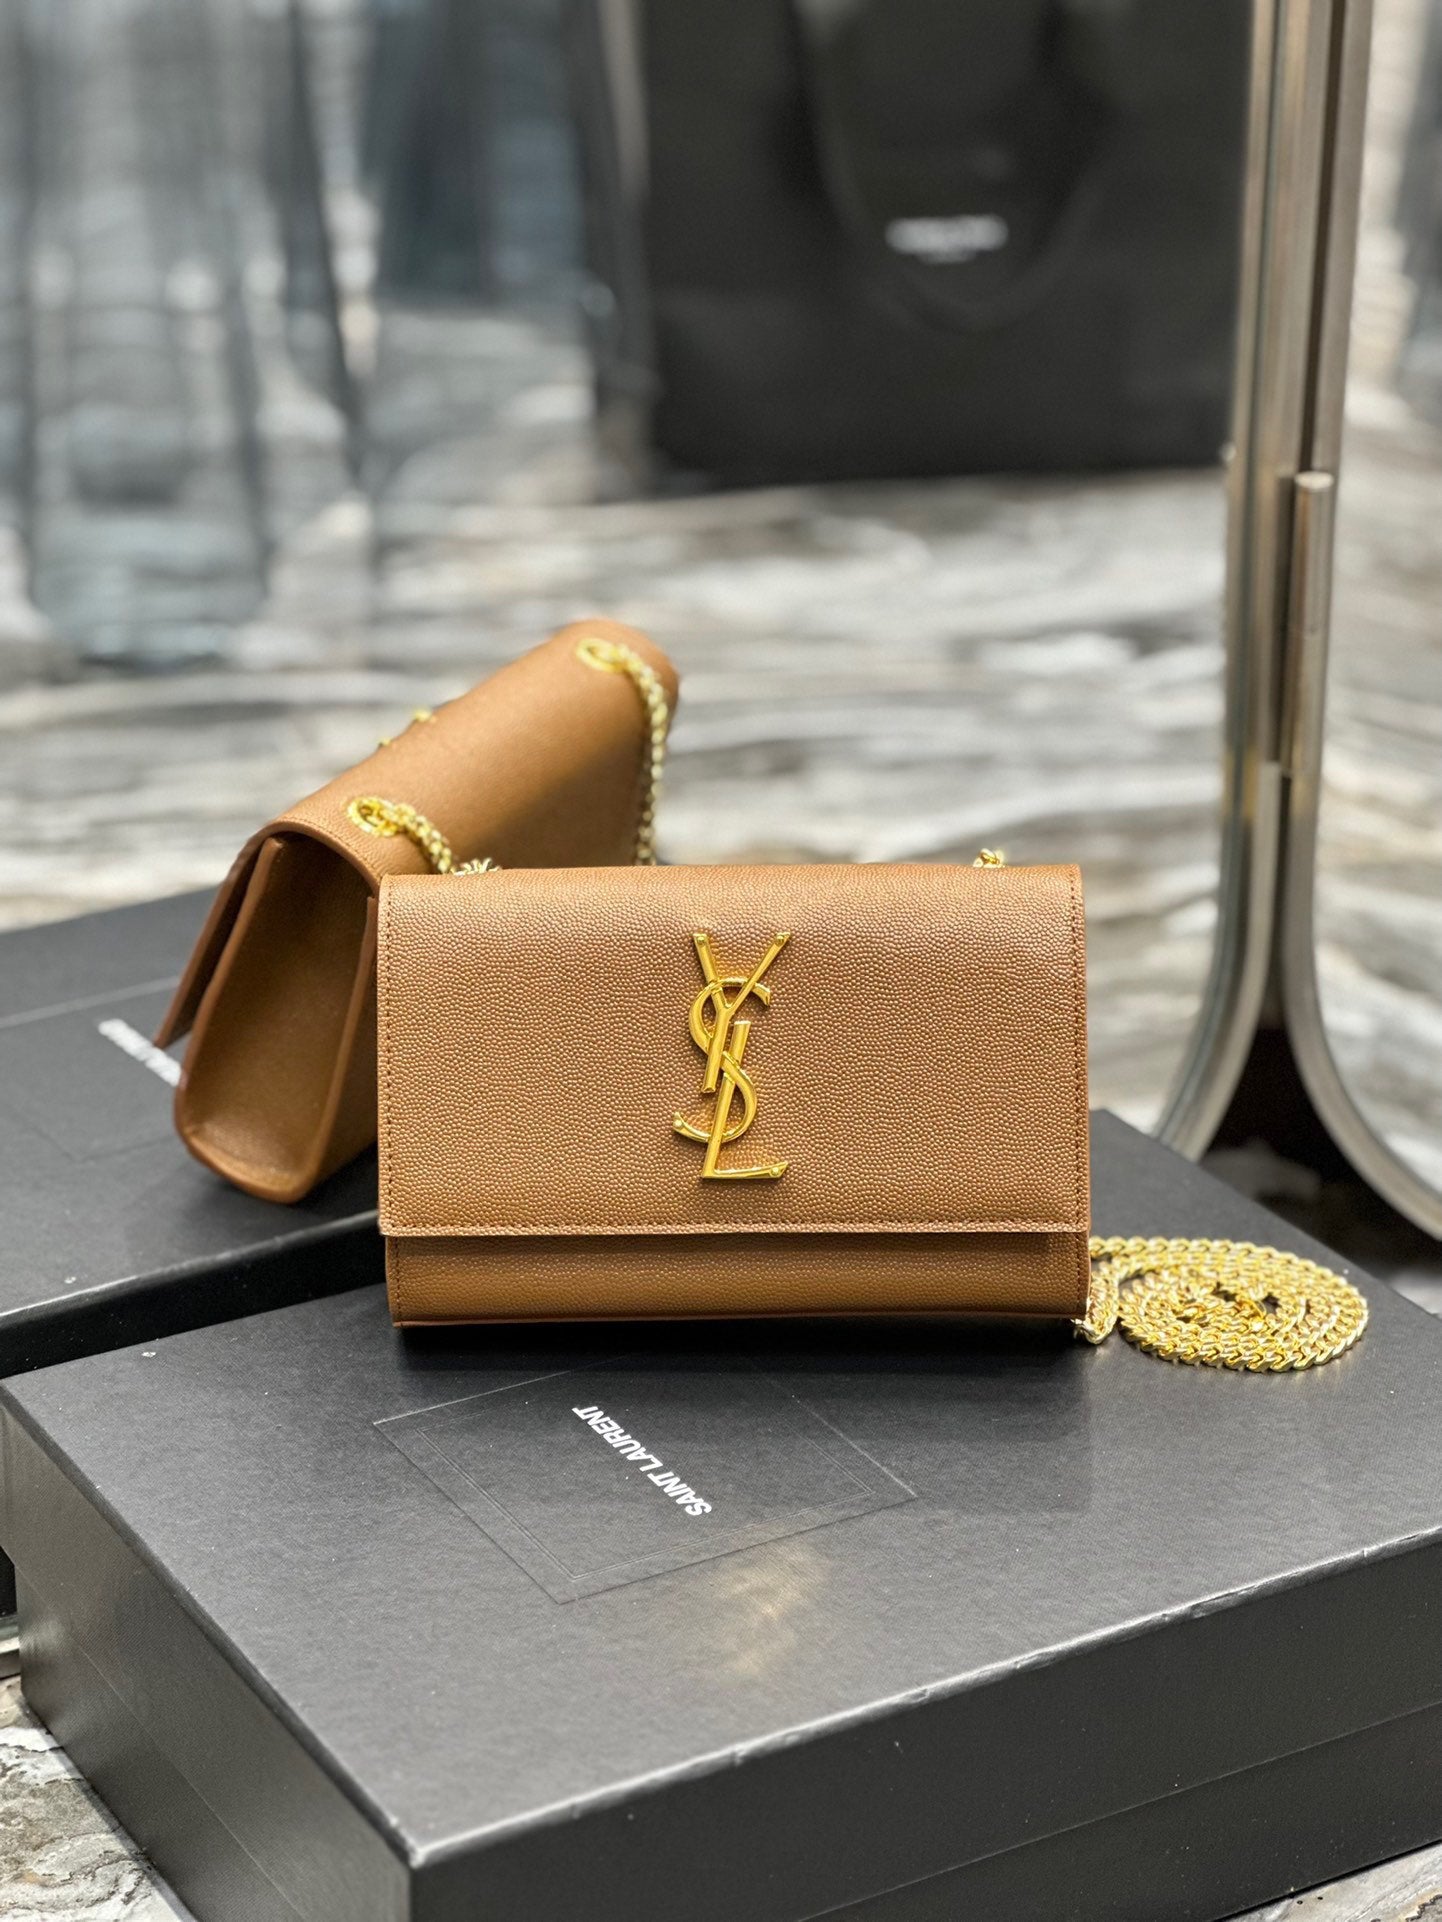 YSL Kate Small leather bag